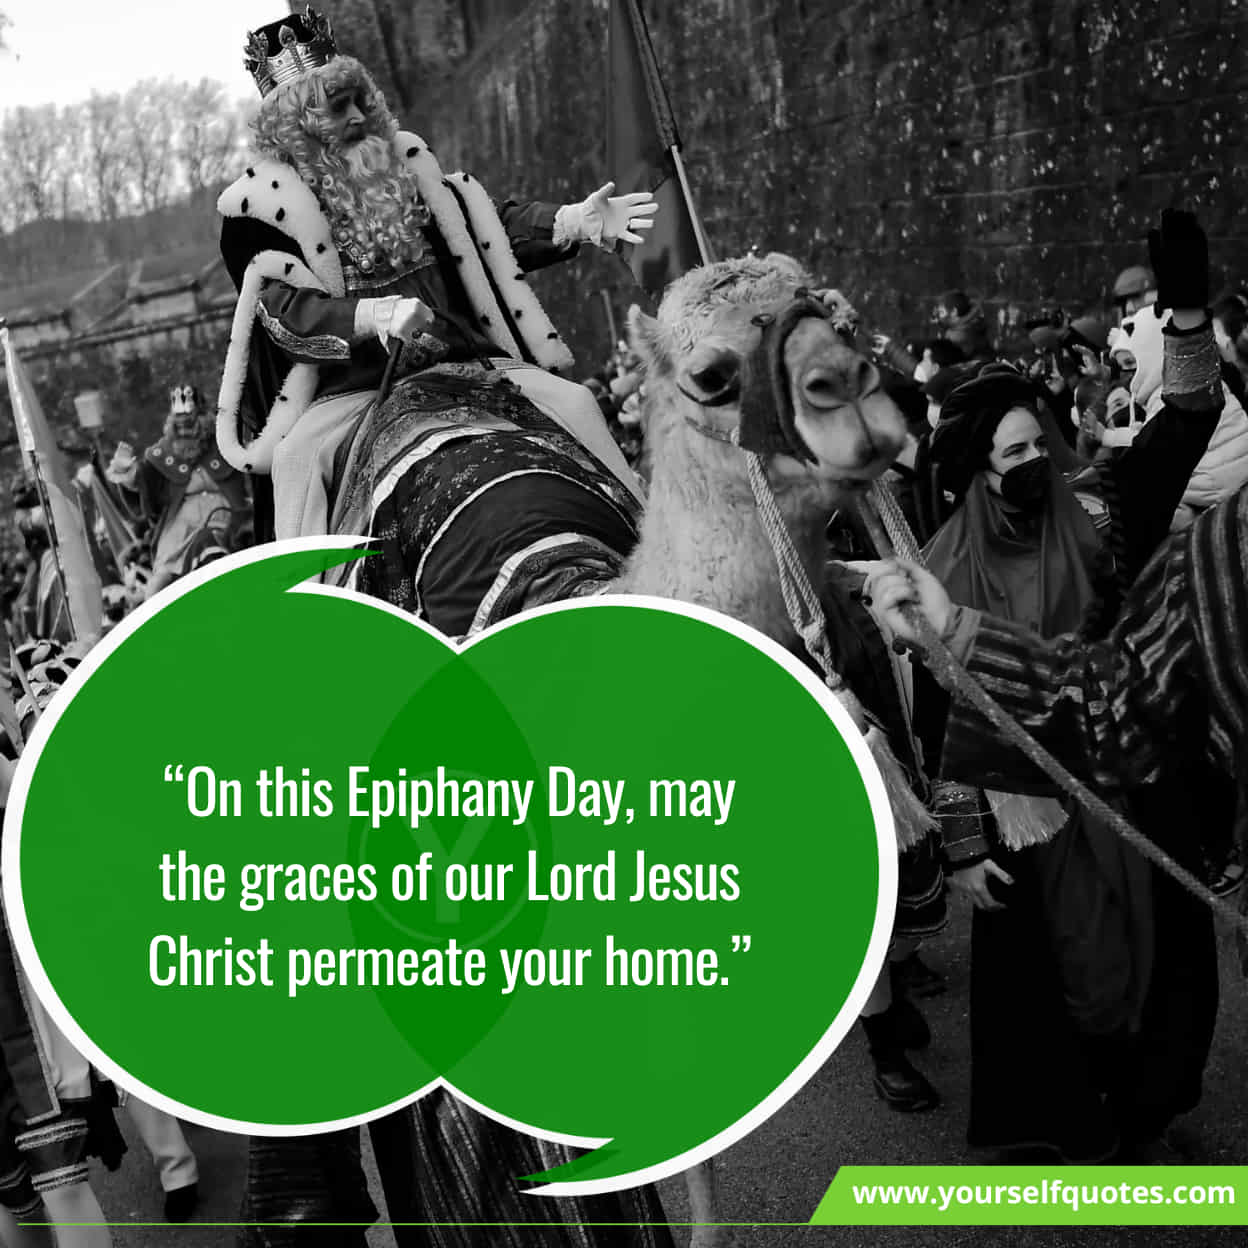 Heart-Warming Happy Epiphany Messages